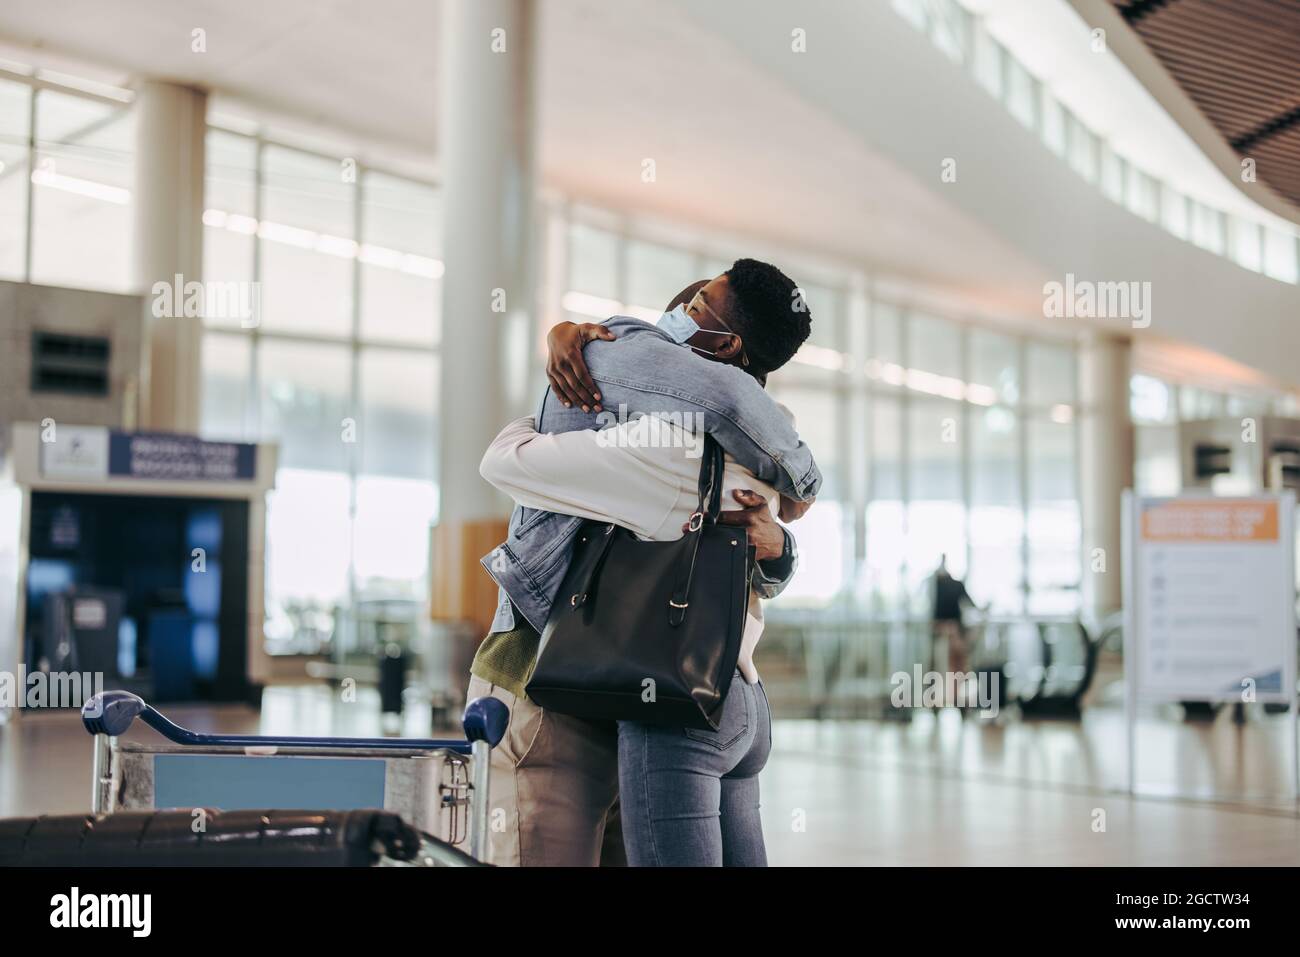 Couple embracing each other before departing at airport. Wife giving good bye hug to her husband at airport departure gate. Stock Photo